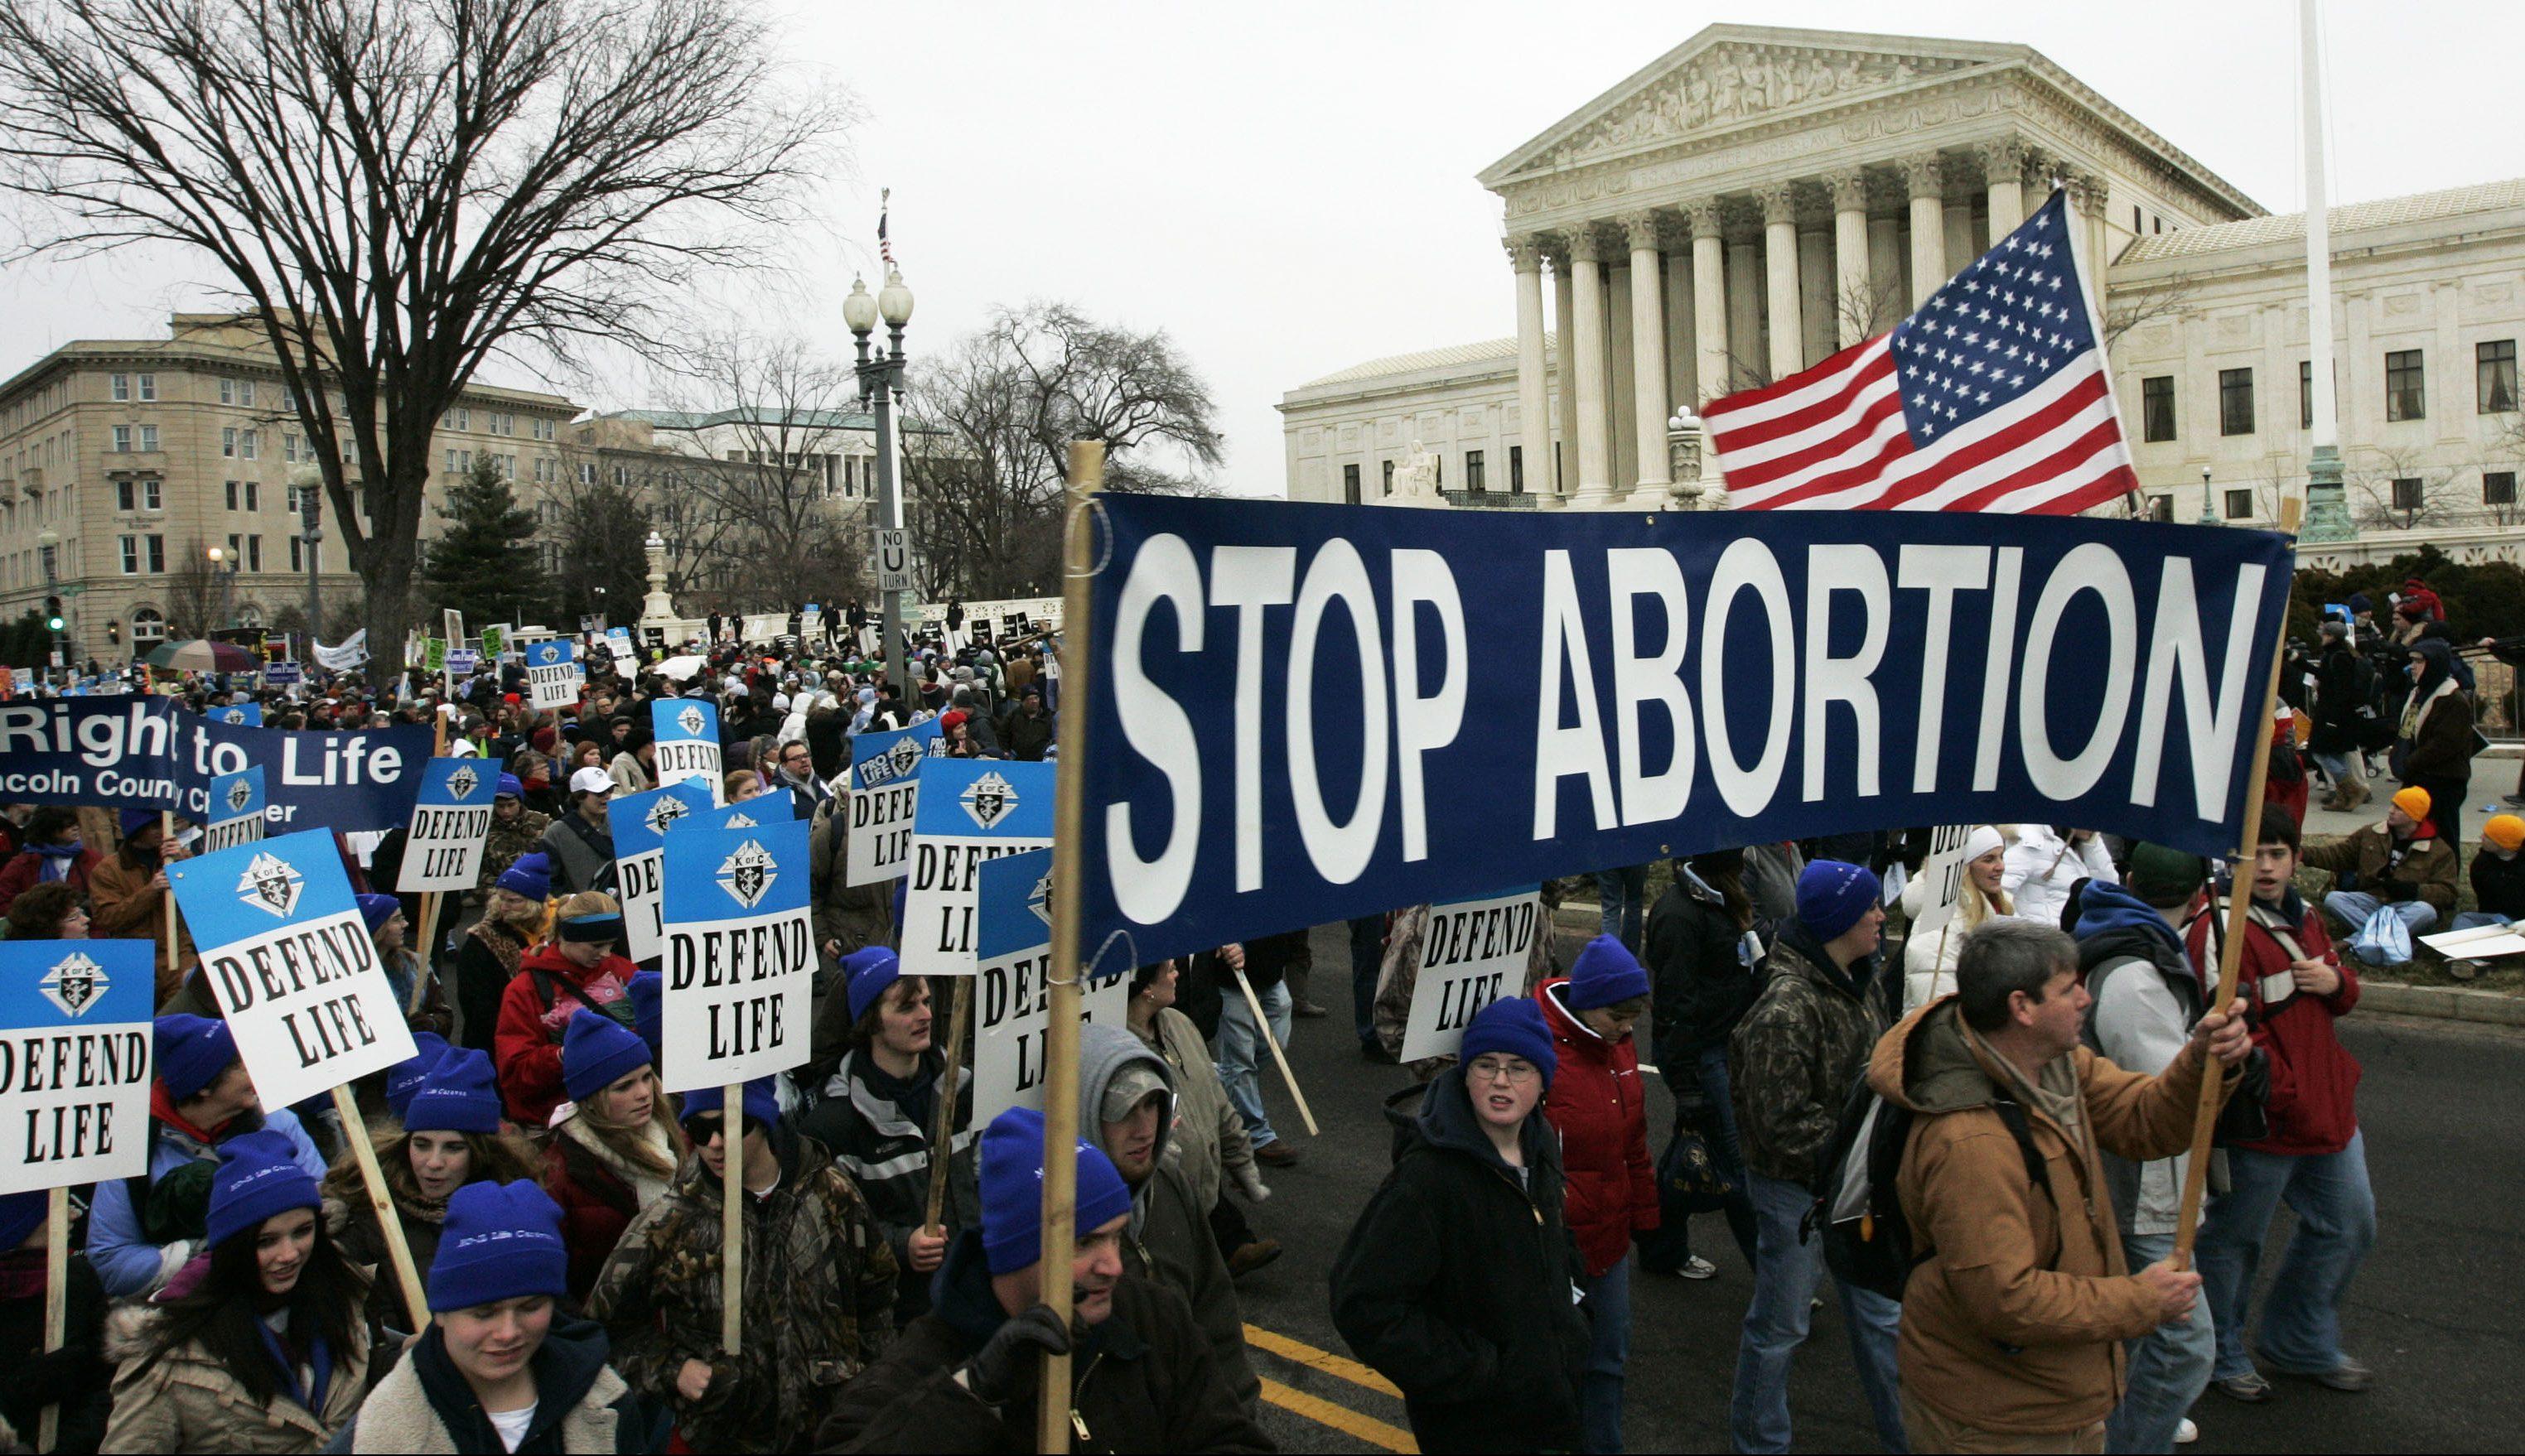 Anti-abortion marchers walk near the Supreme Court during the annual March for Life, Tuesday, Jan. 22, 2008, in Washington. The rally comes 35 years after the Supreme Court ruled that a Texas woman with the pseudonym Jane Roe had a constitutional right to have an abortion. (AP Photo/Haraz N. Ghanbari)